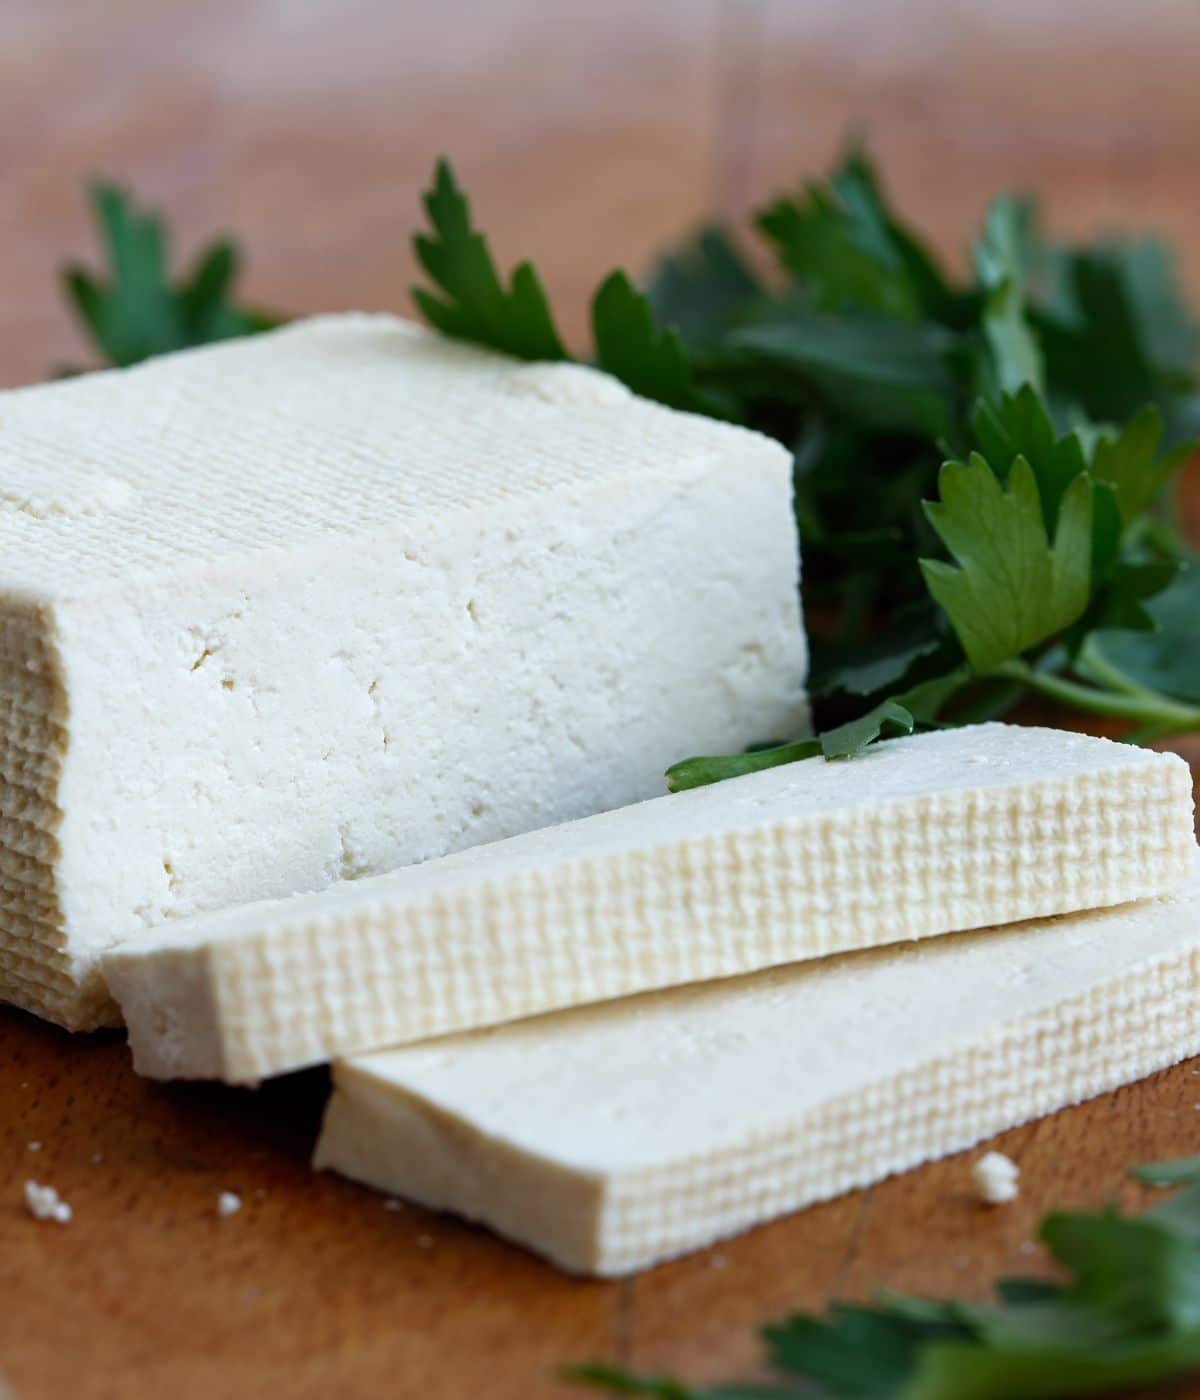 A tofu block is on the cutting board along with parsley. 